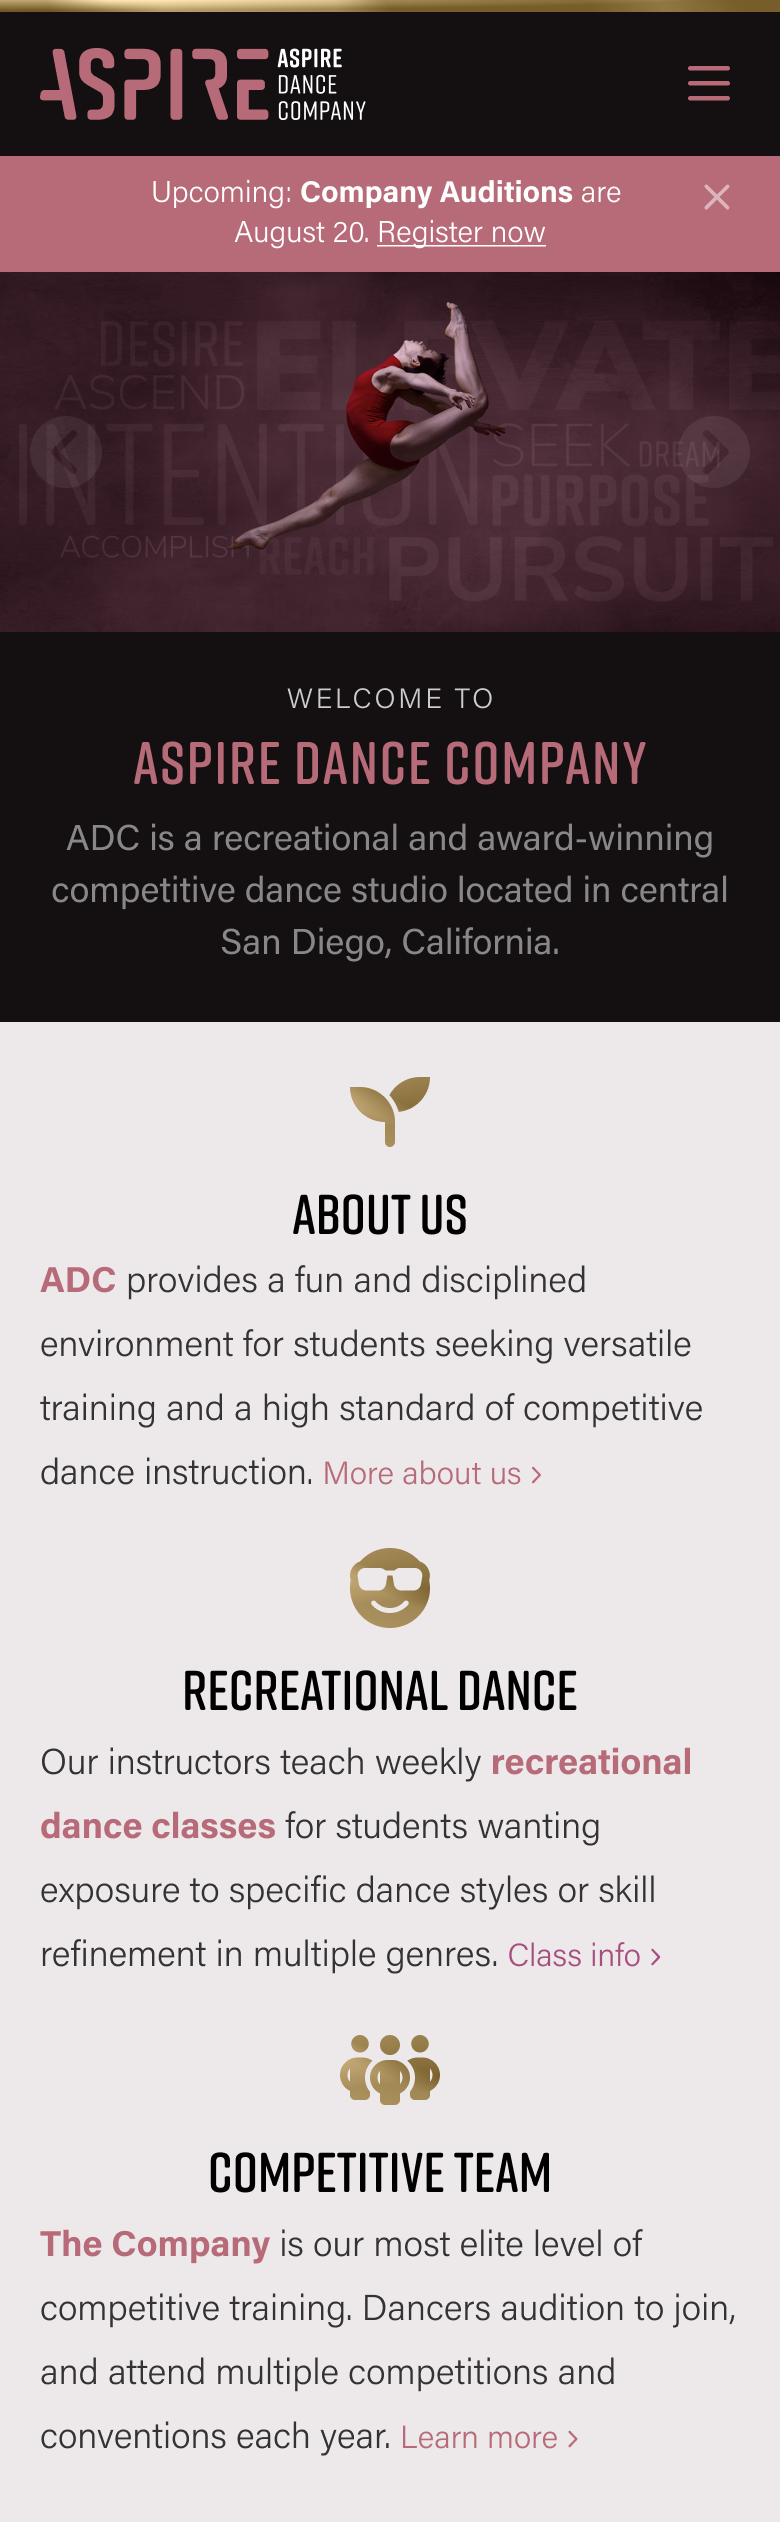 ADC home page